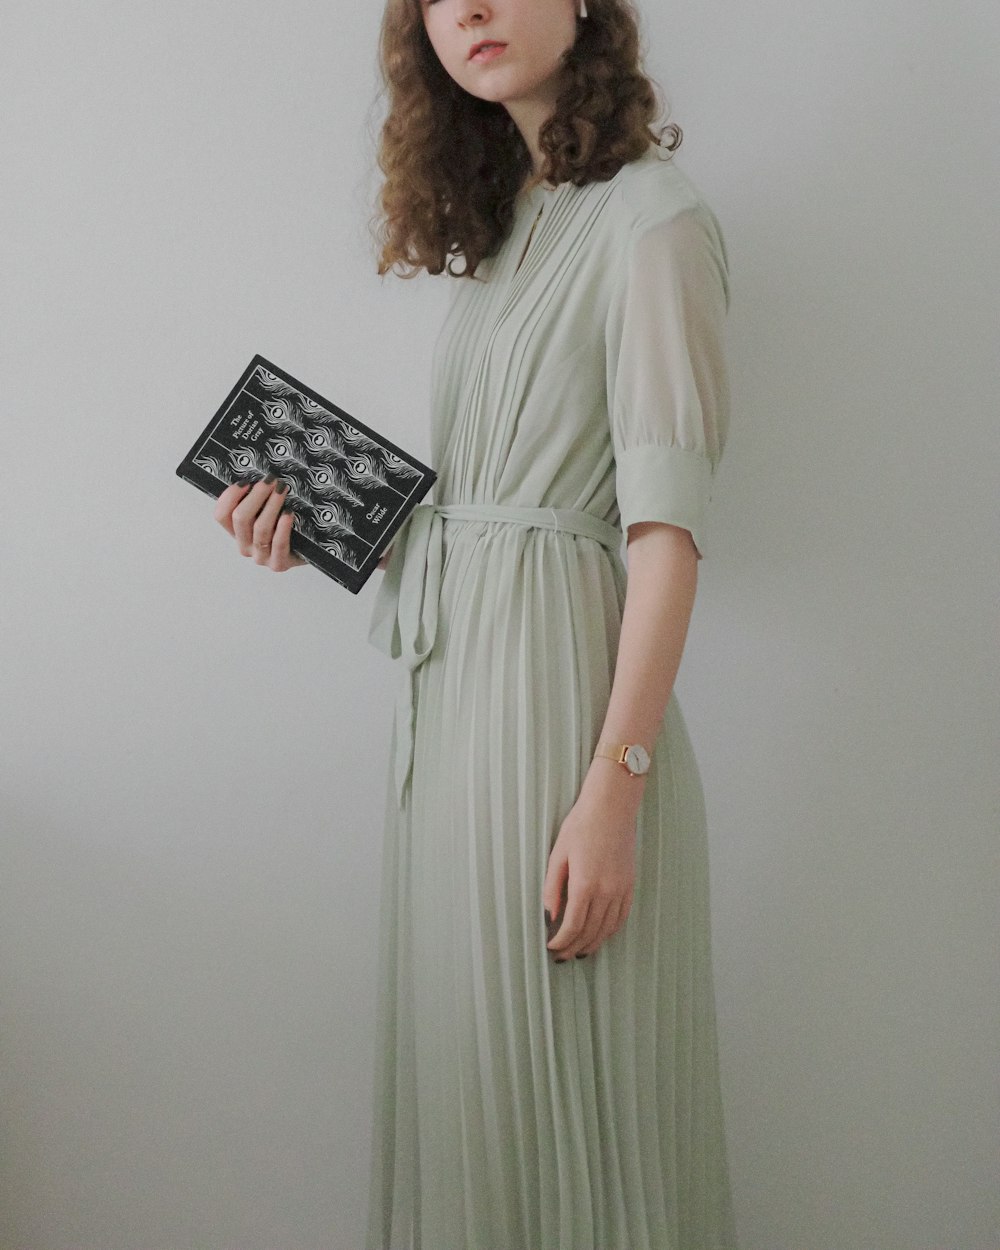 a woman in a green dress holding a black box